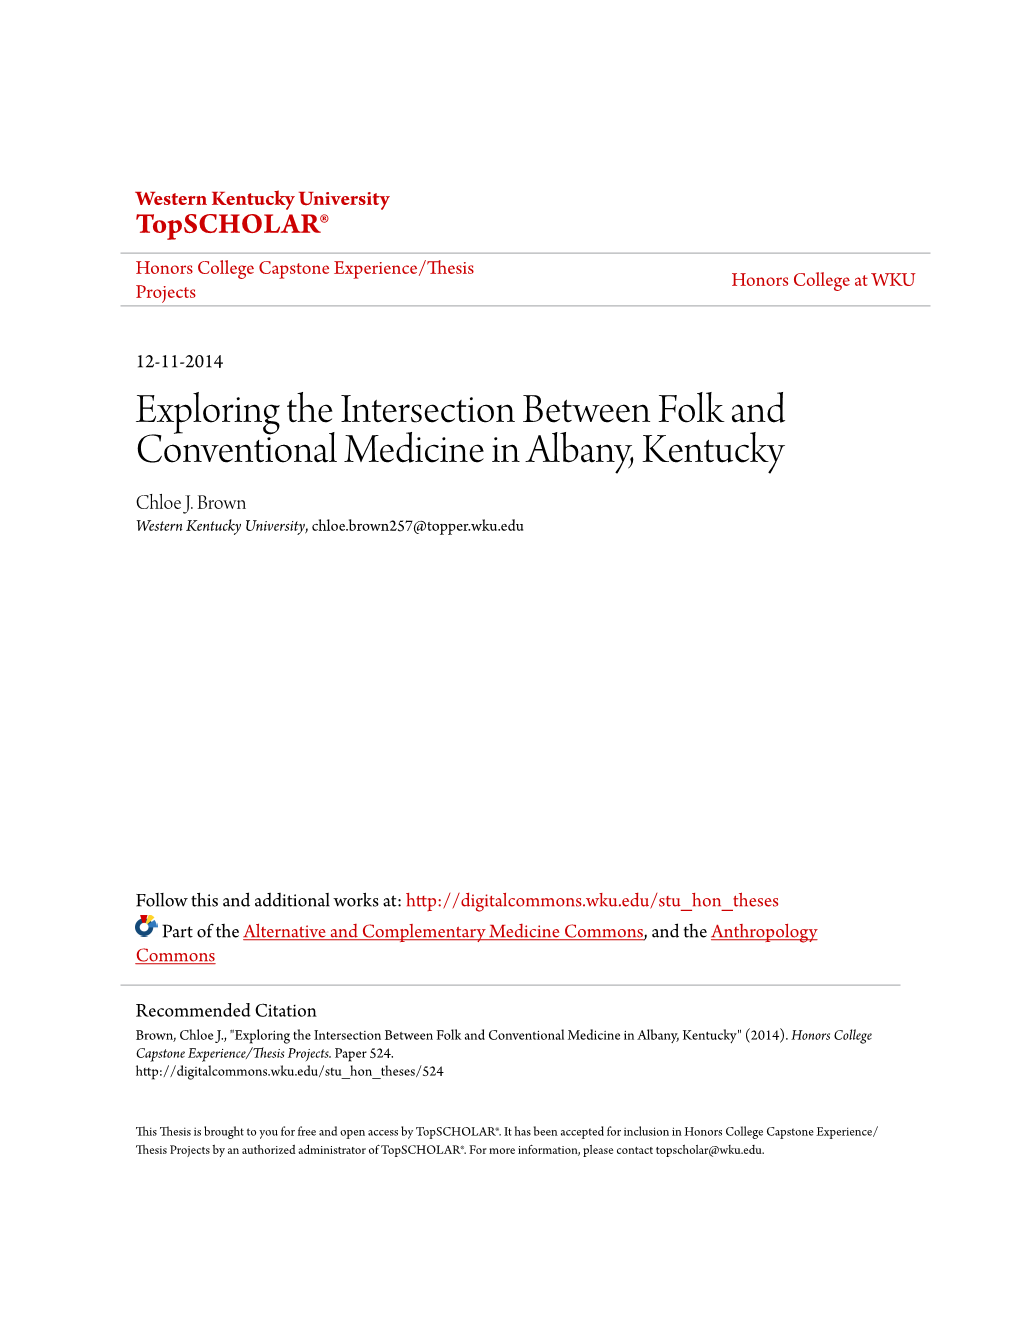 Exploring the Intersection Between Folk and Conventional Medicine in Albany, Kentucky Chloe J